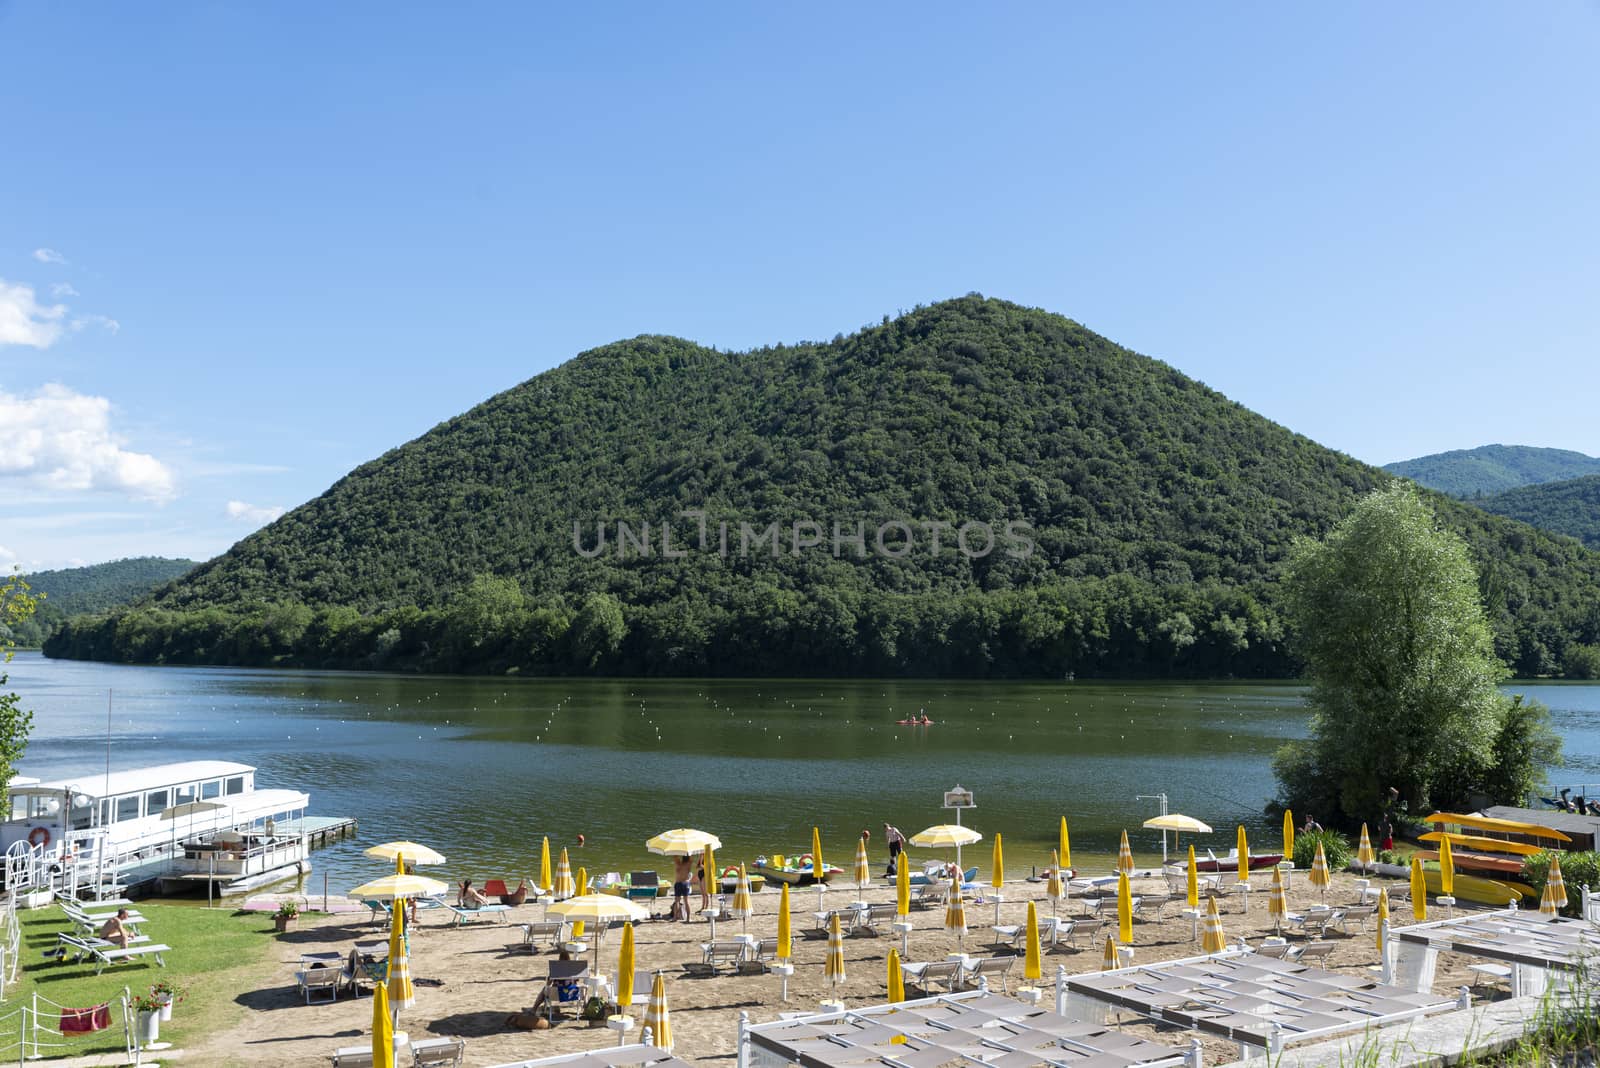 pidiluco,italy june 22 2020 :piediluco lake and its beach with ferry in the middle of the lake